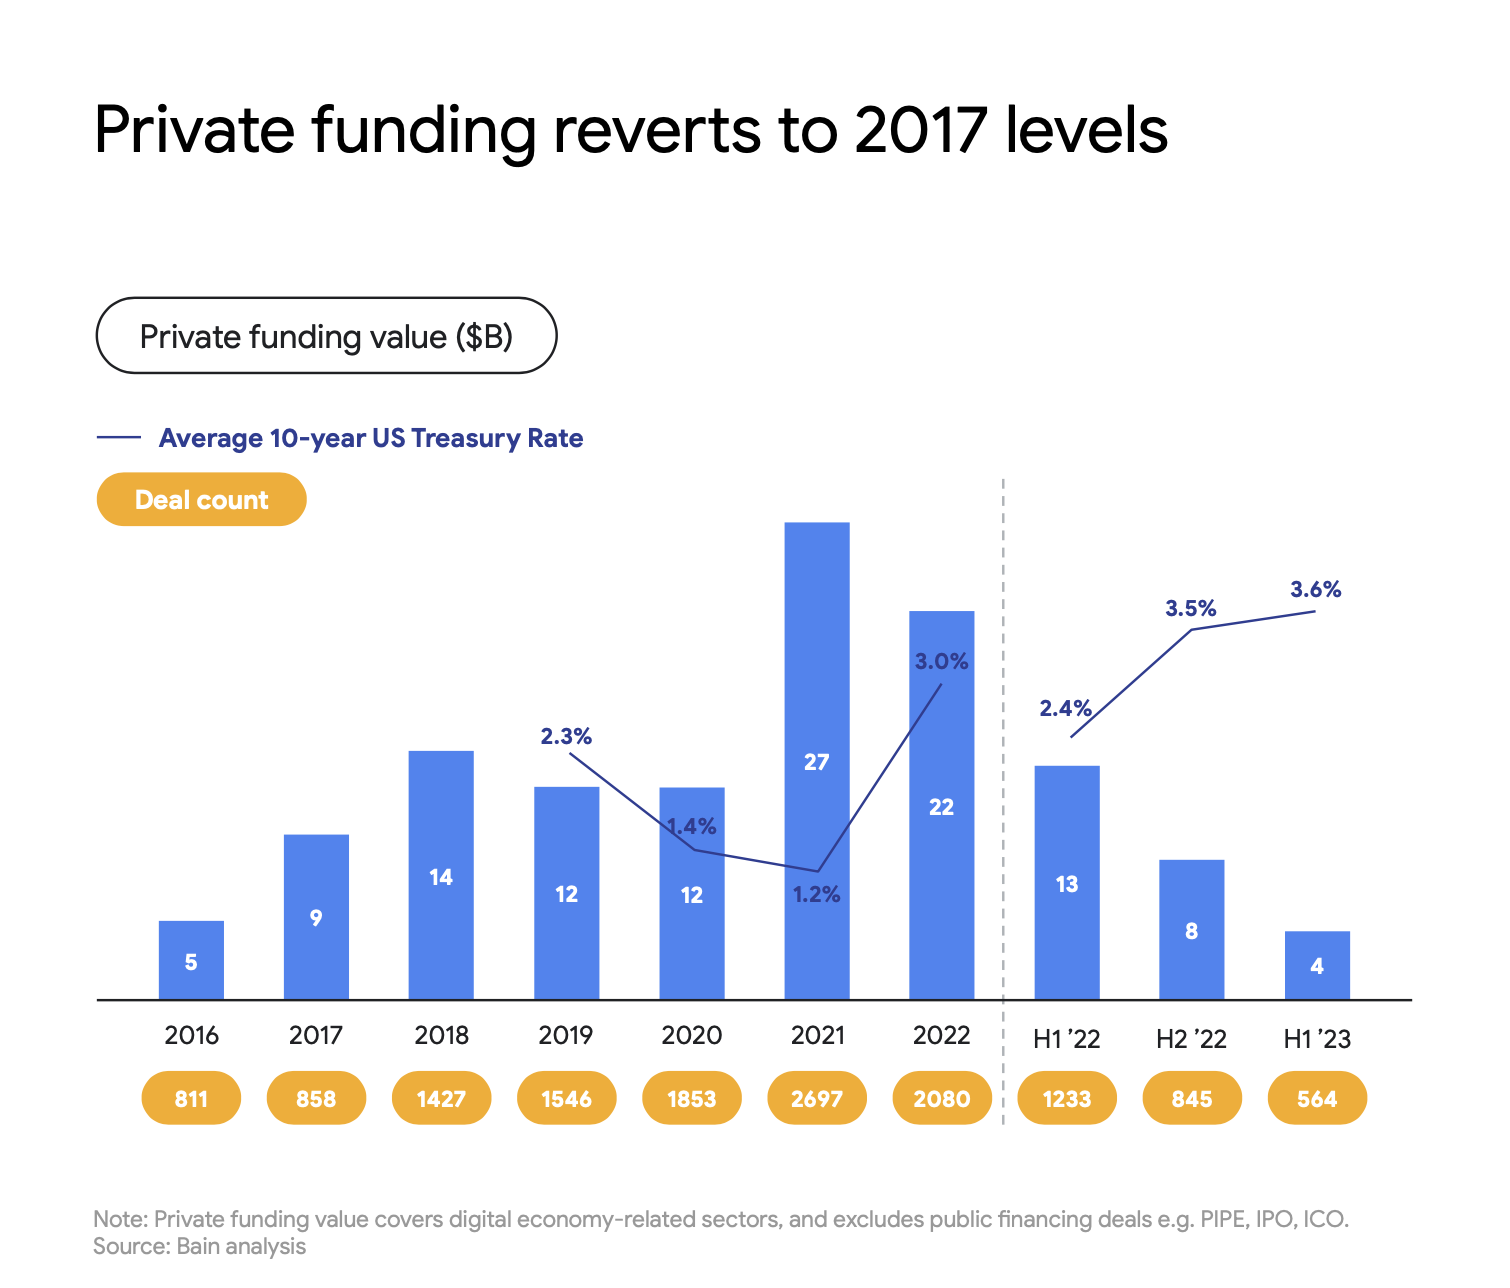 Private funding reverts to 2017 levels